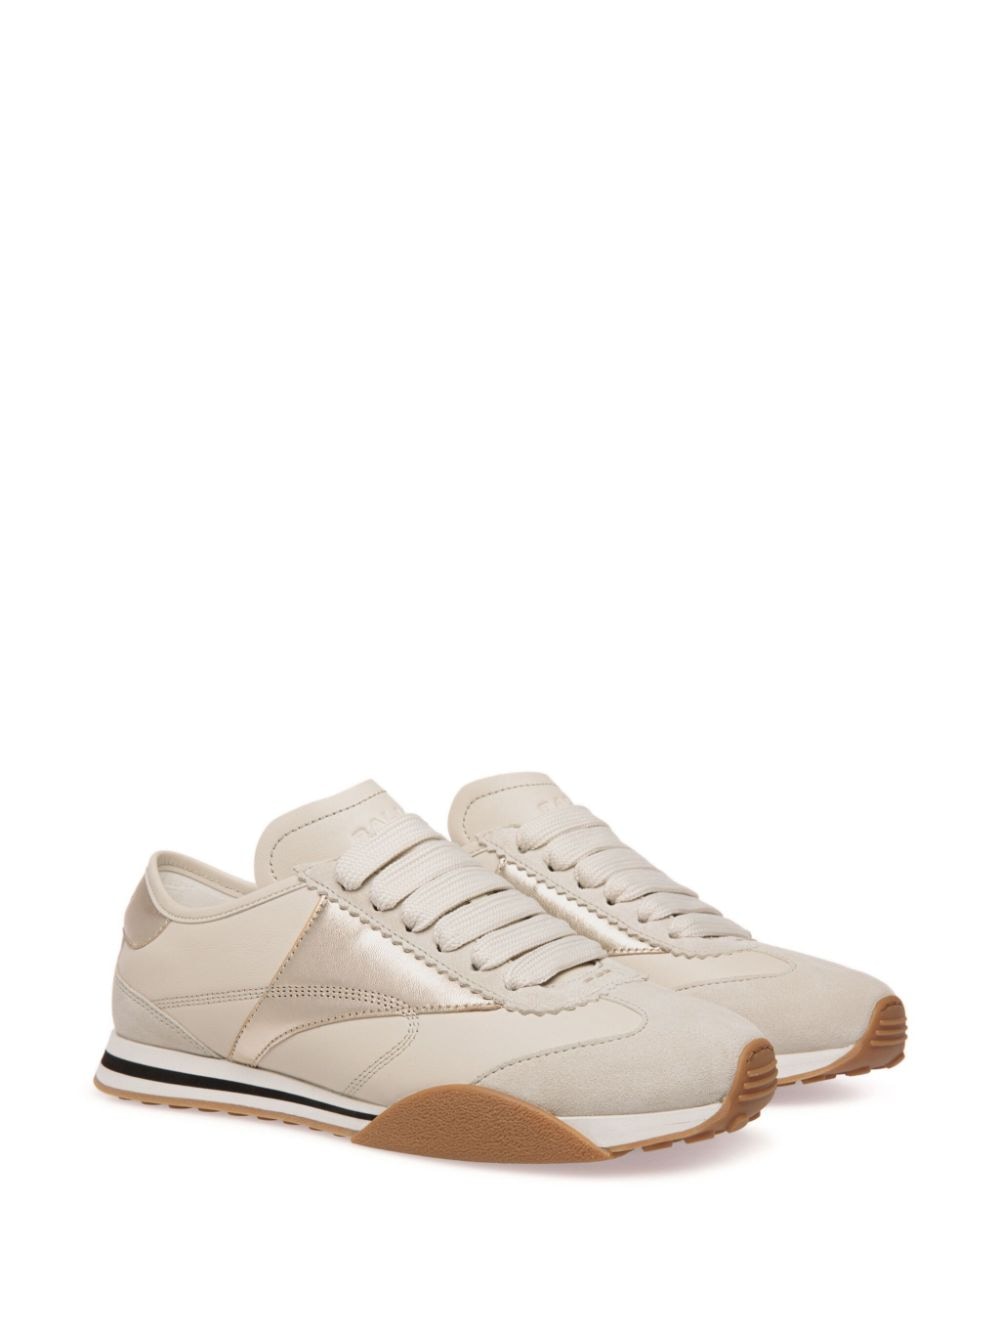 Bally Sussex leather sneakers - Beige